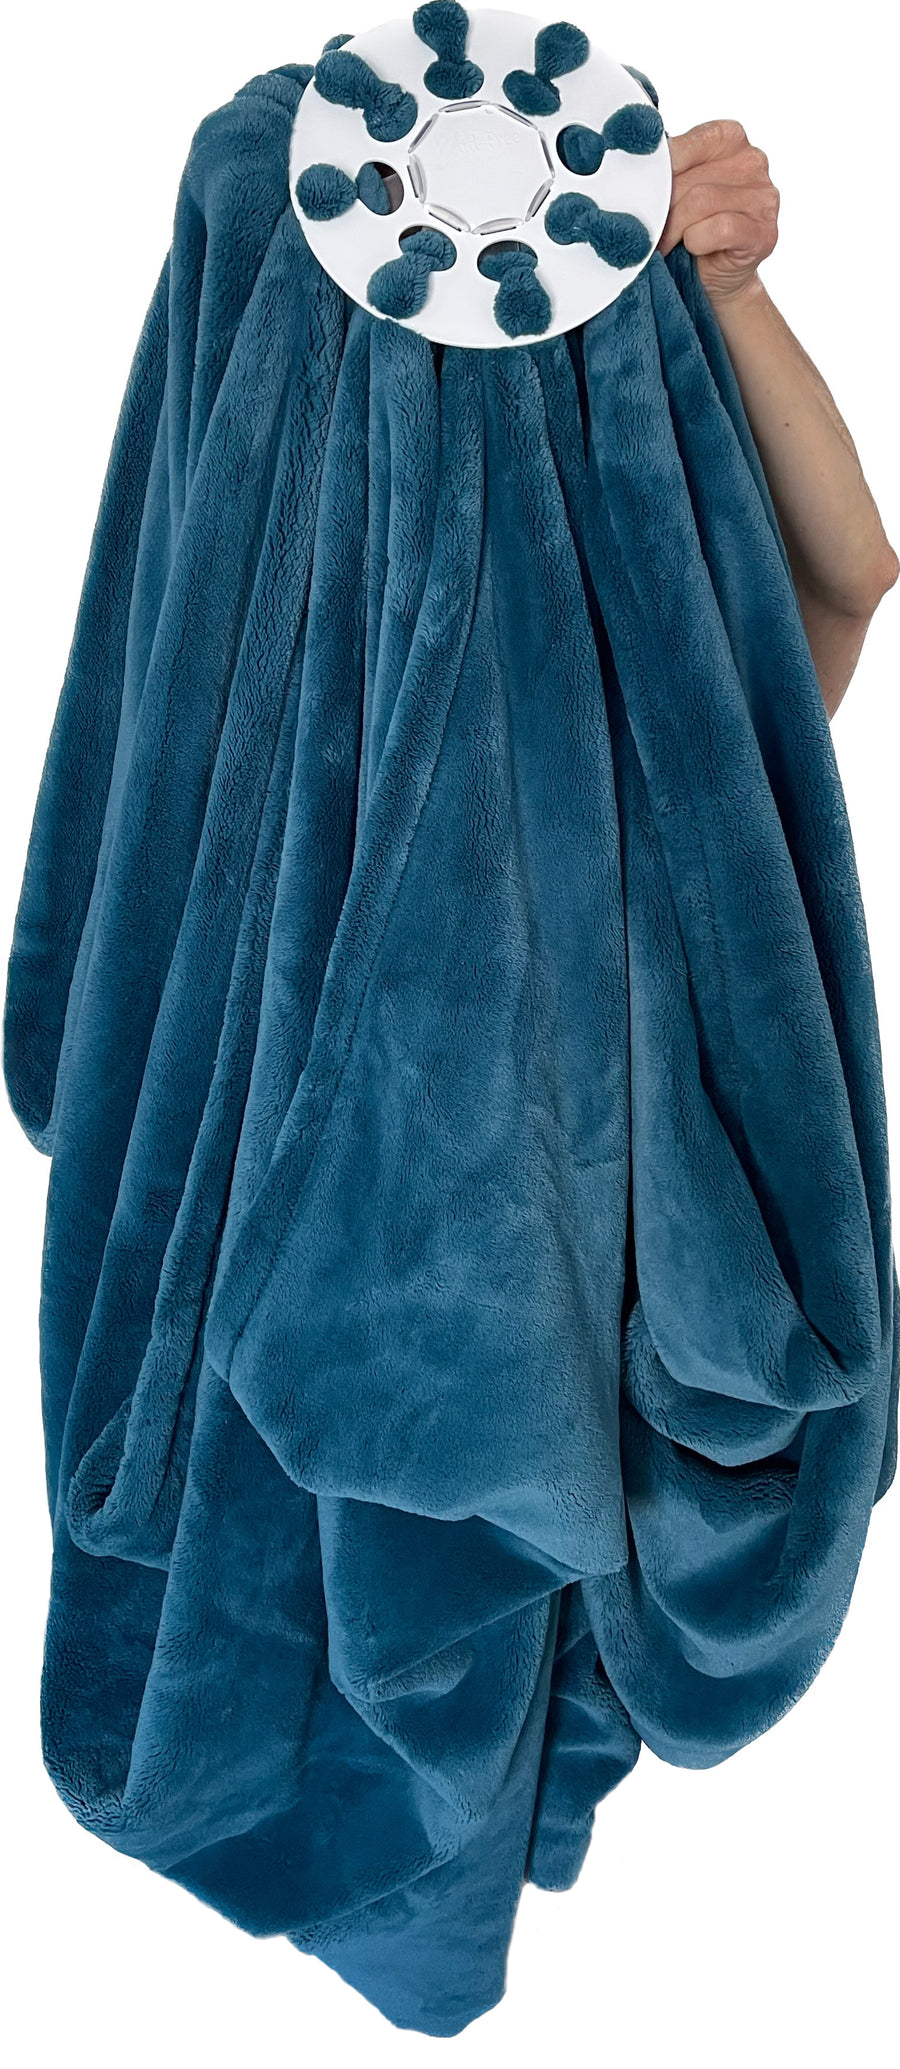 Wad-Free for Blankets and Duvet Covers shown attached to teal plush blanket and held up by a hand